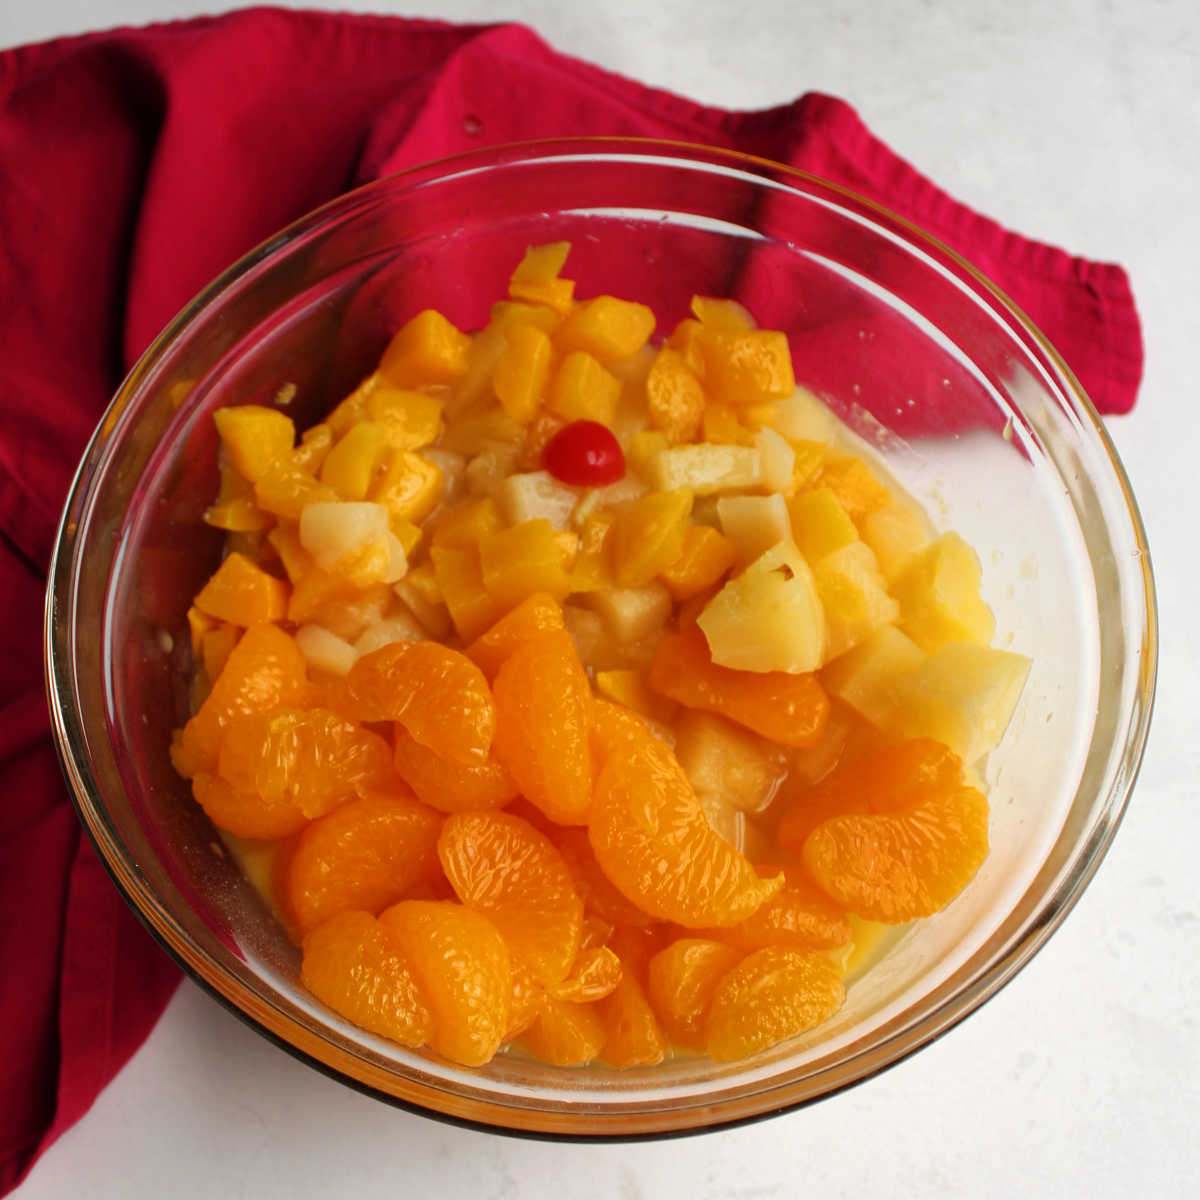 Drained oranges, pineapple and fruit cocktail on top dressing mixture.